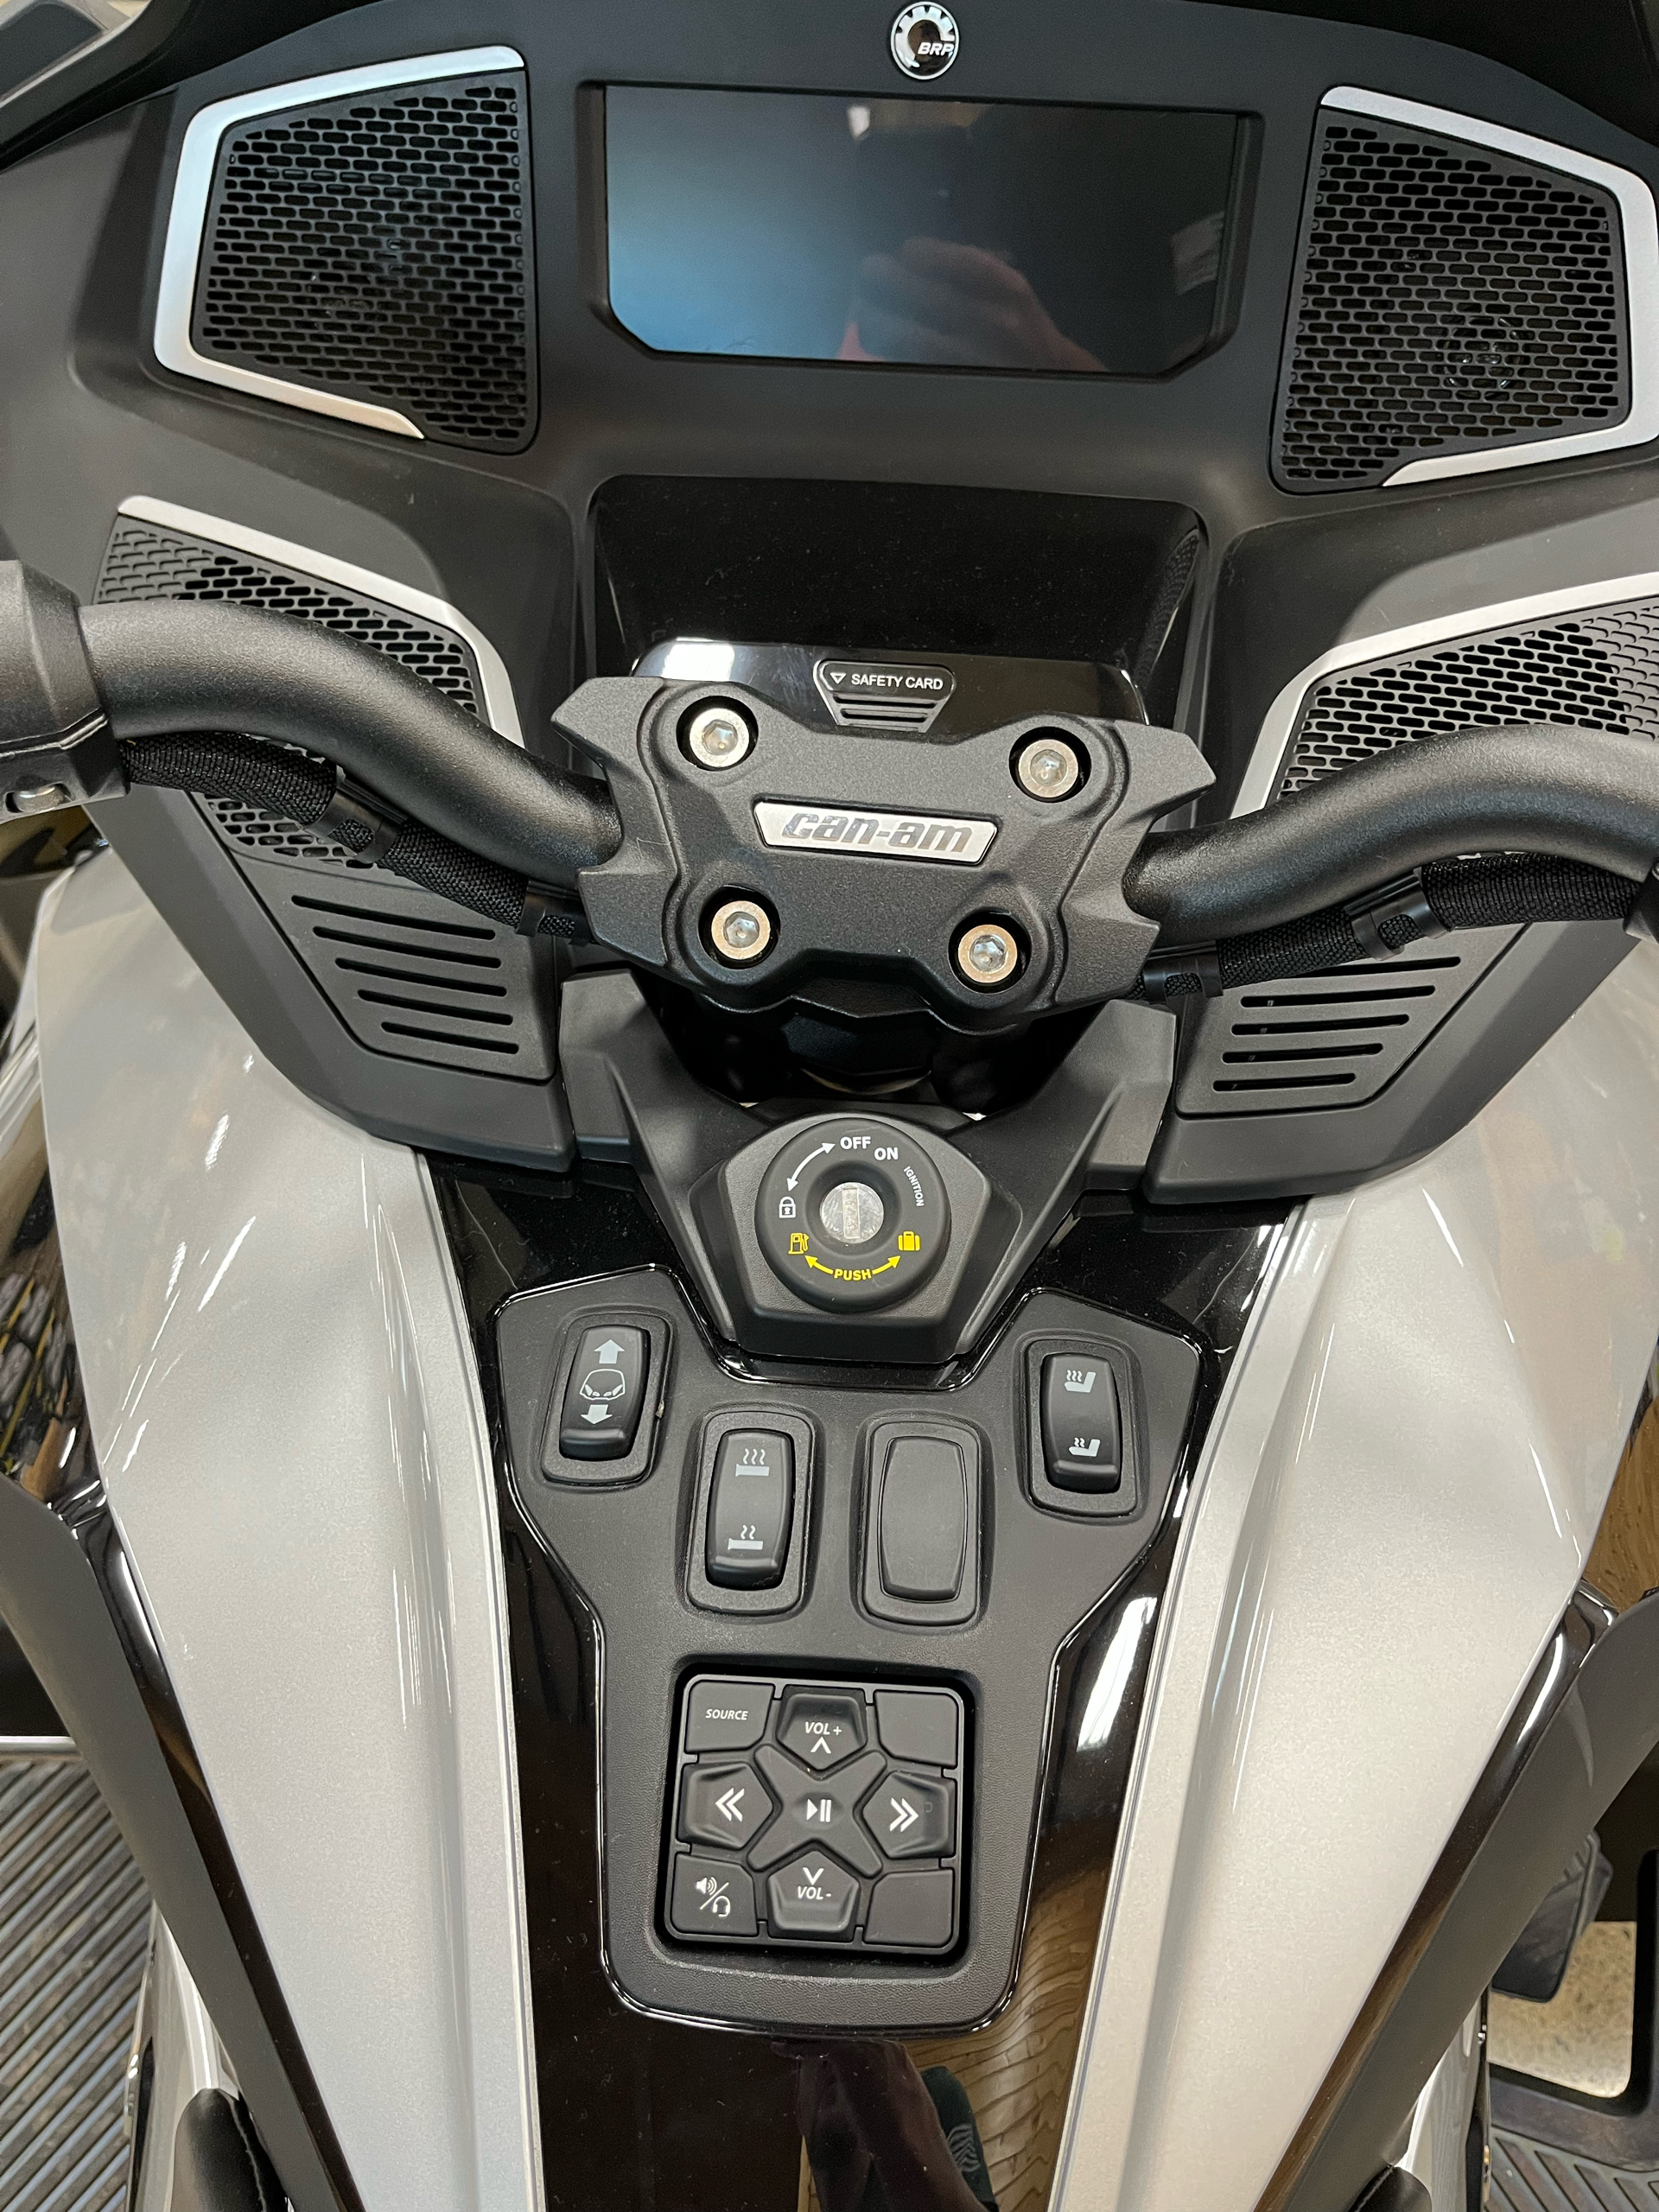 2022 Can-Am Spyder RT Limited in Montrose, Pennsylvania - Photo 7